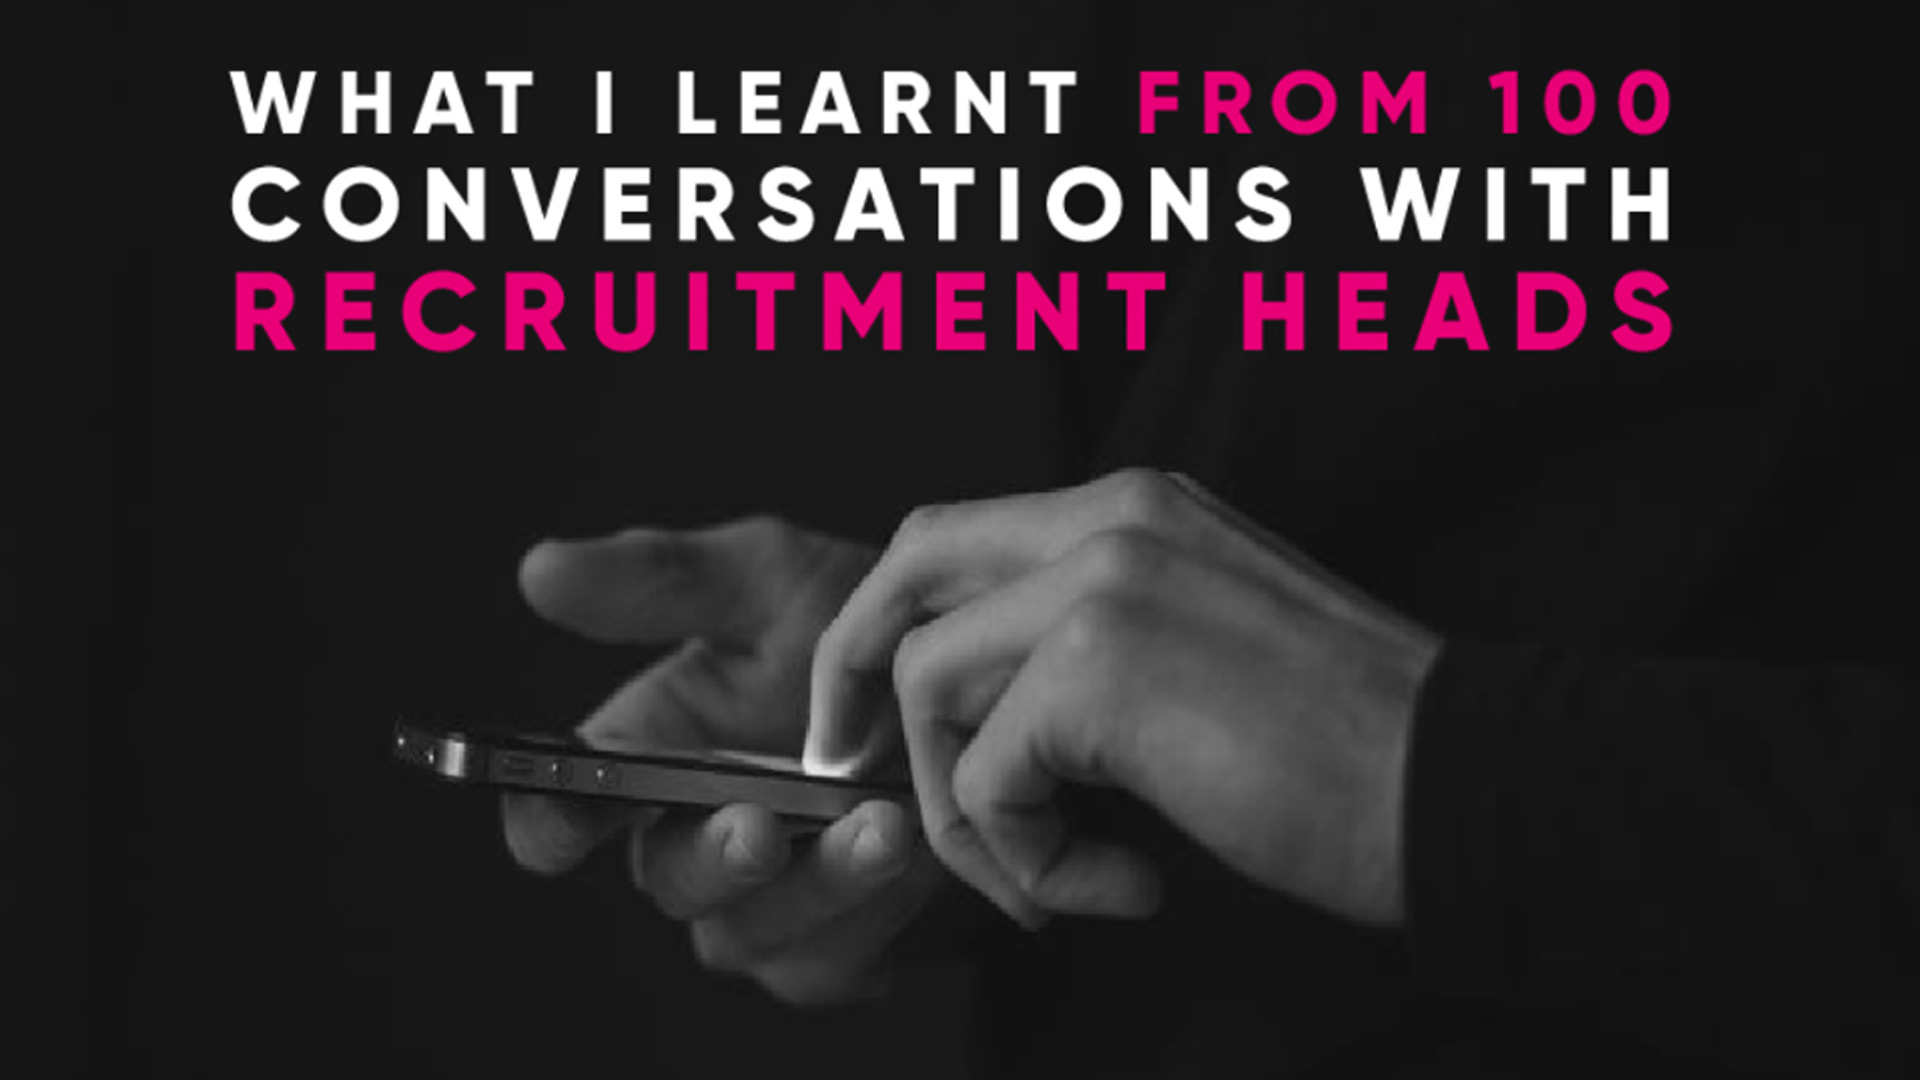 What I Learnt from 100 Conversations with Recruitment Heads